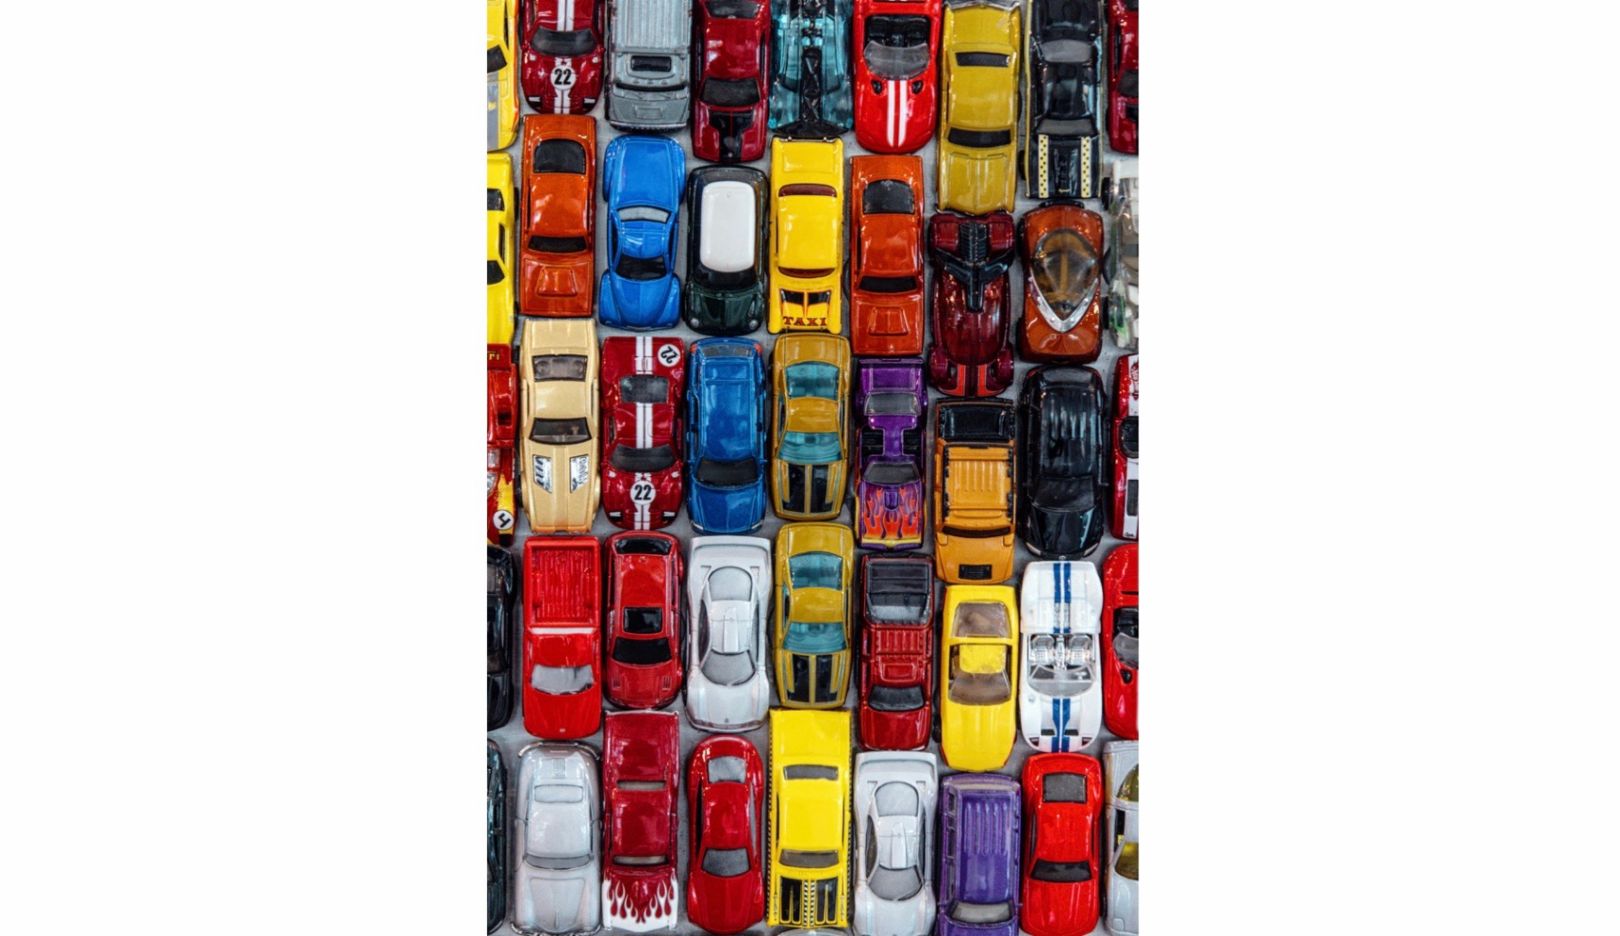 Art in the public sphere: Huether used 30,000 toy cars to create a collage that adorns a parking garage in Stockton, California.